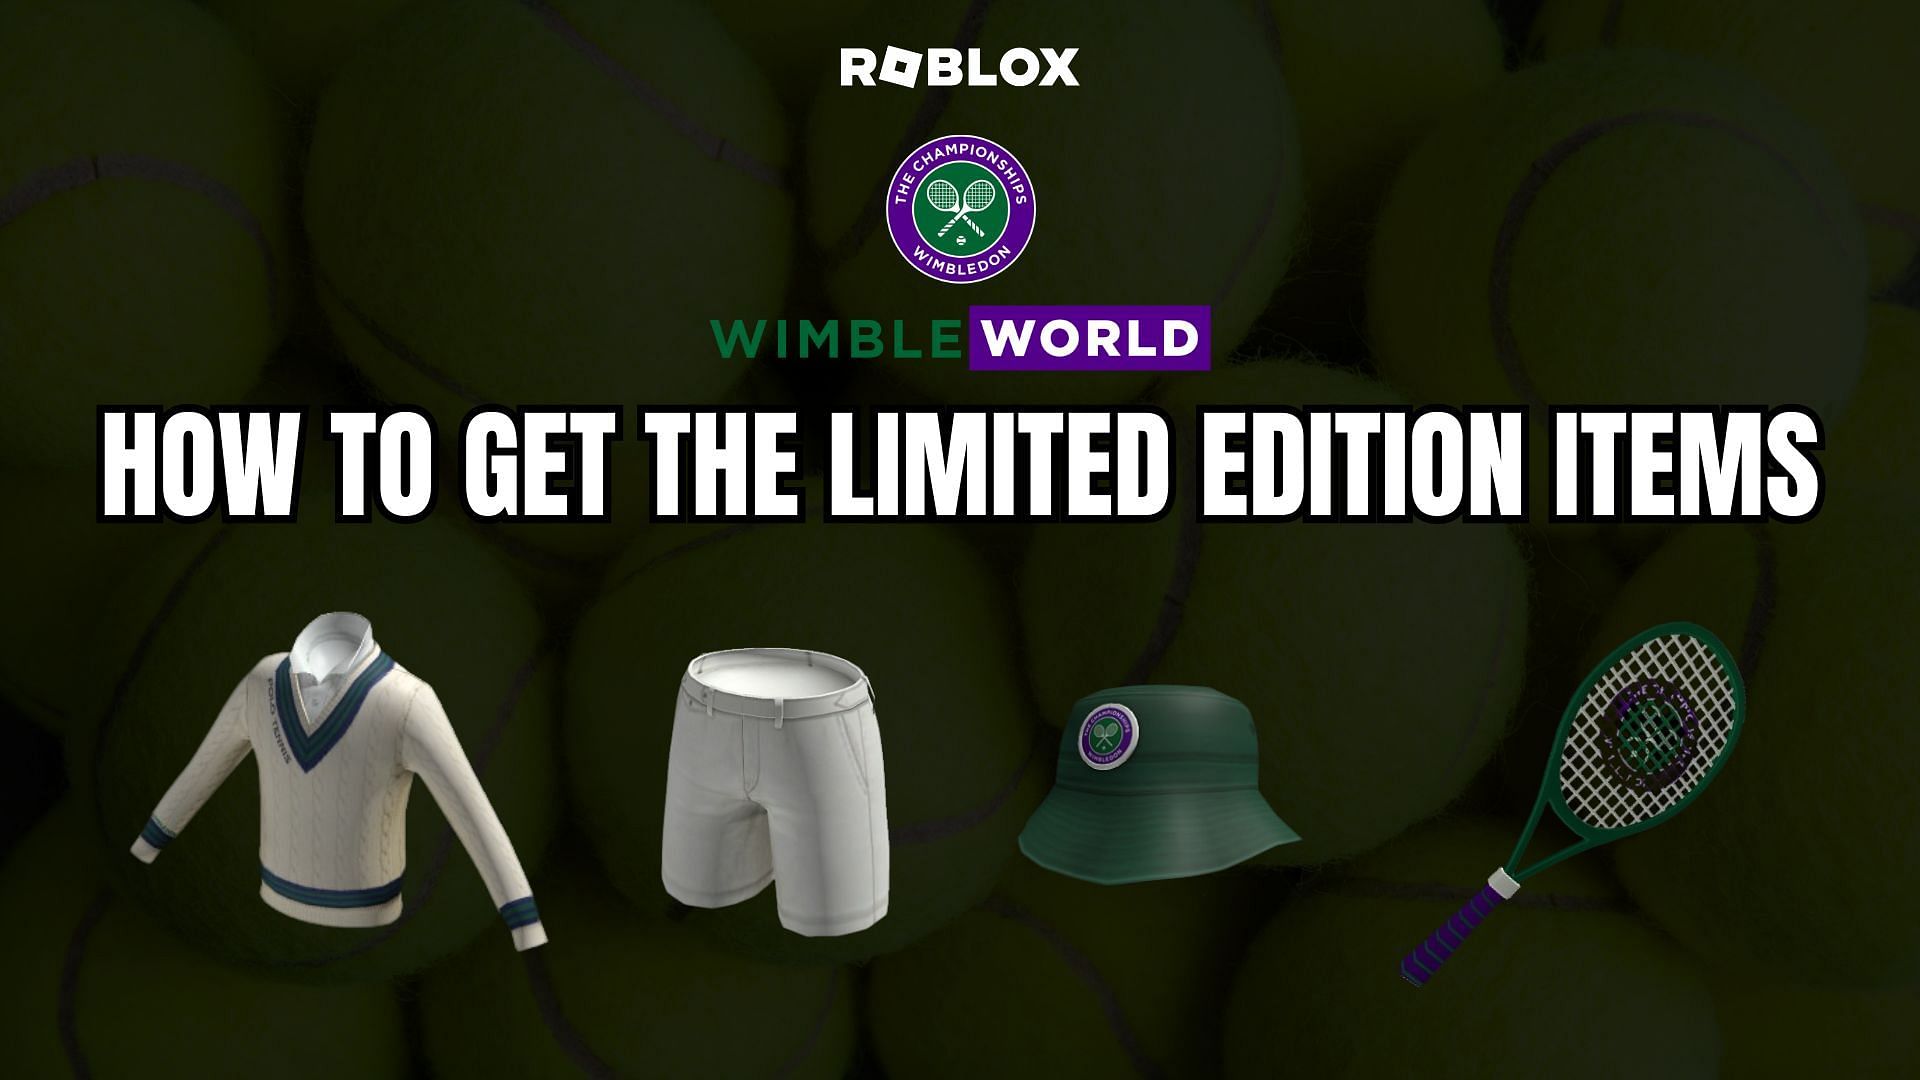 How to get off sale items in roblox! 